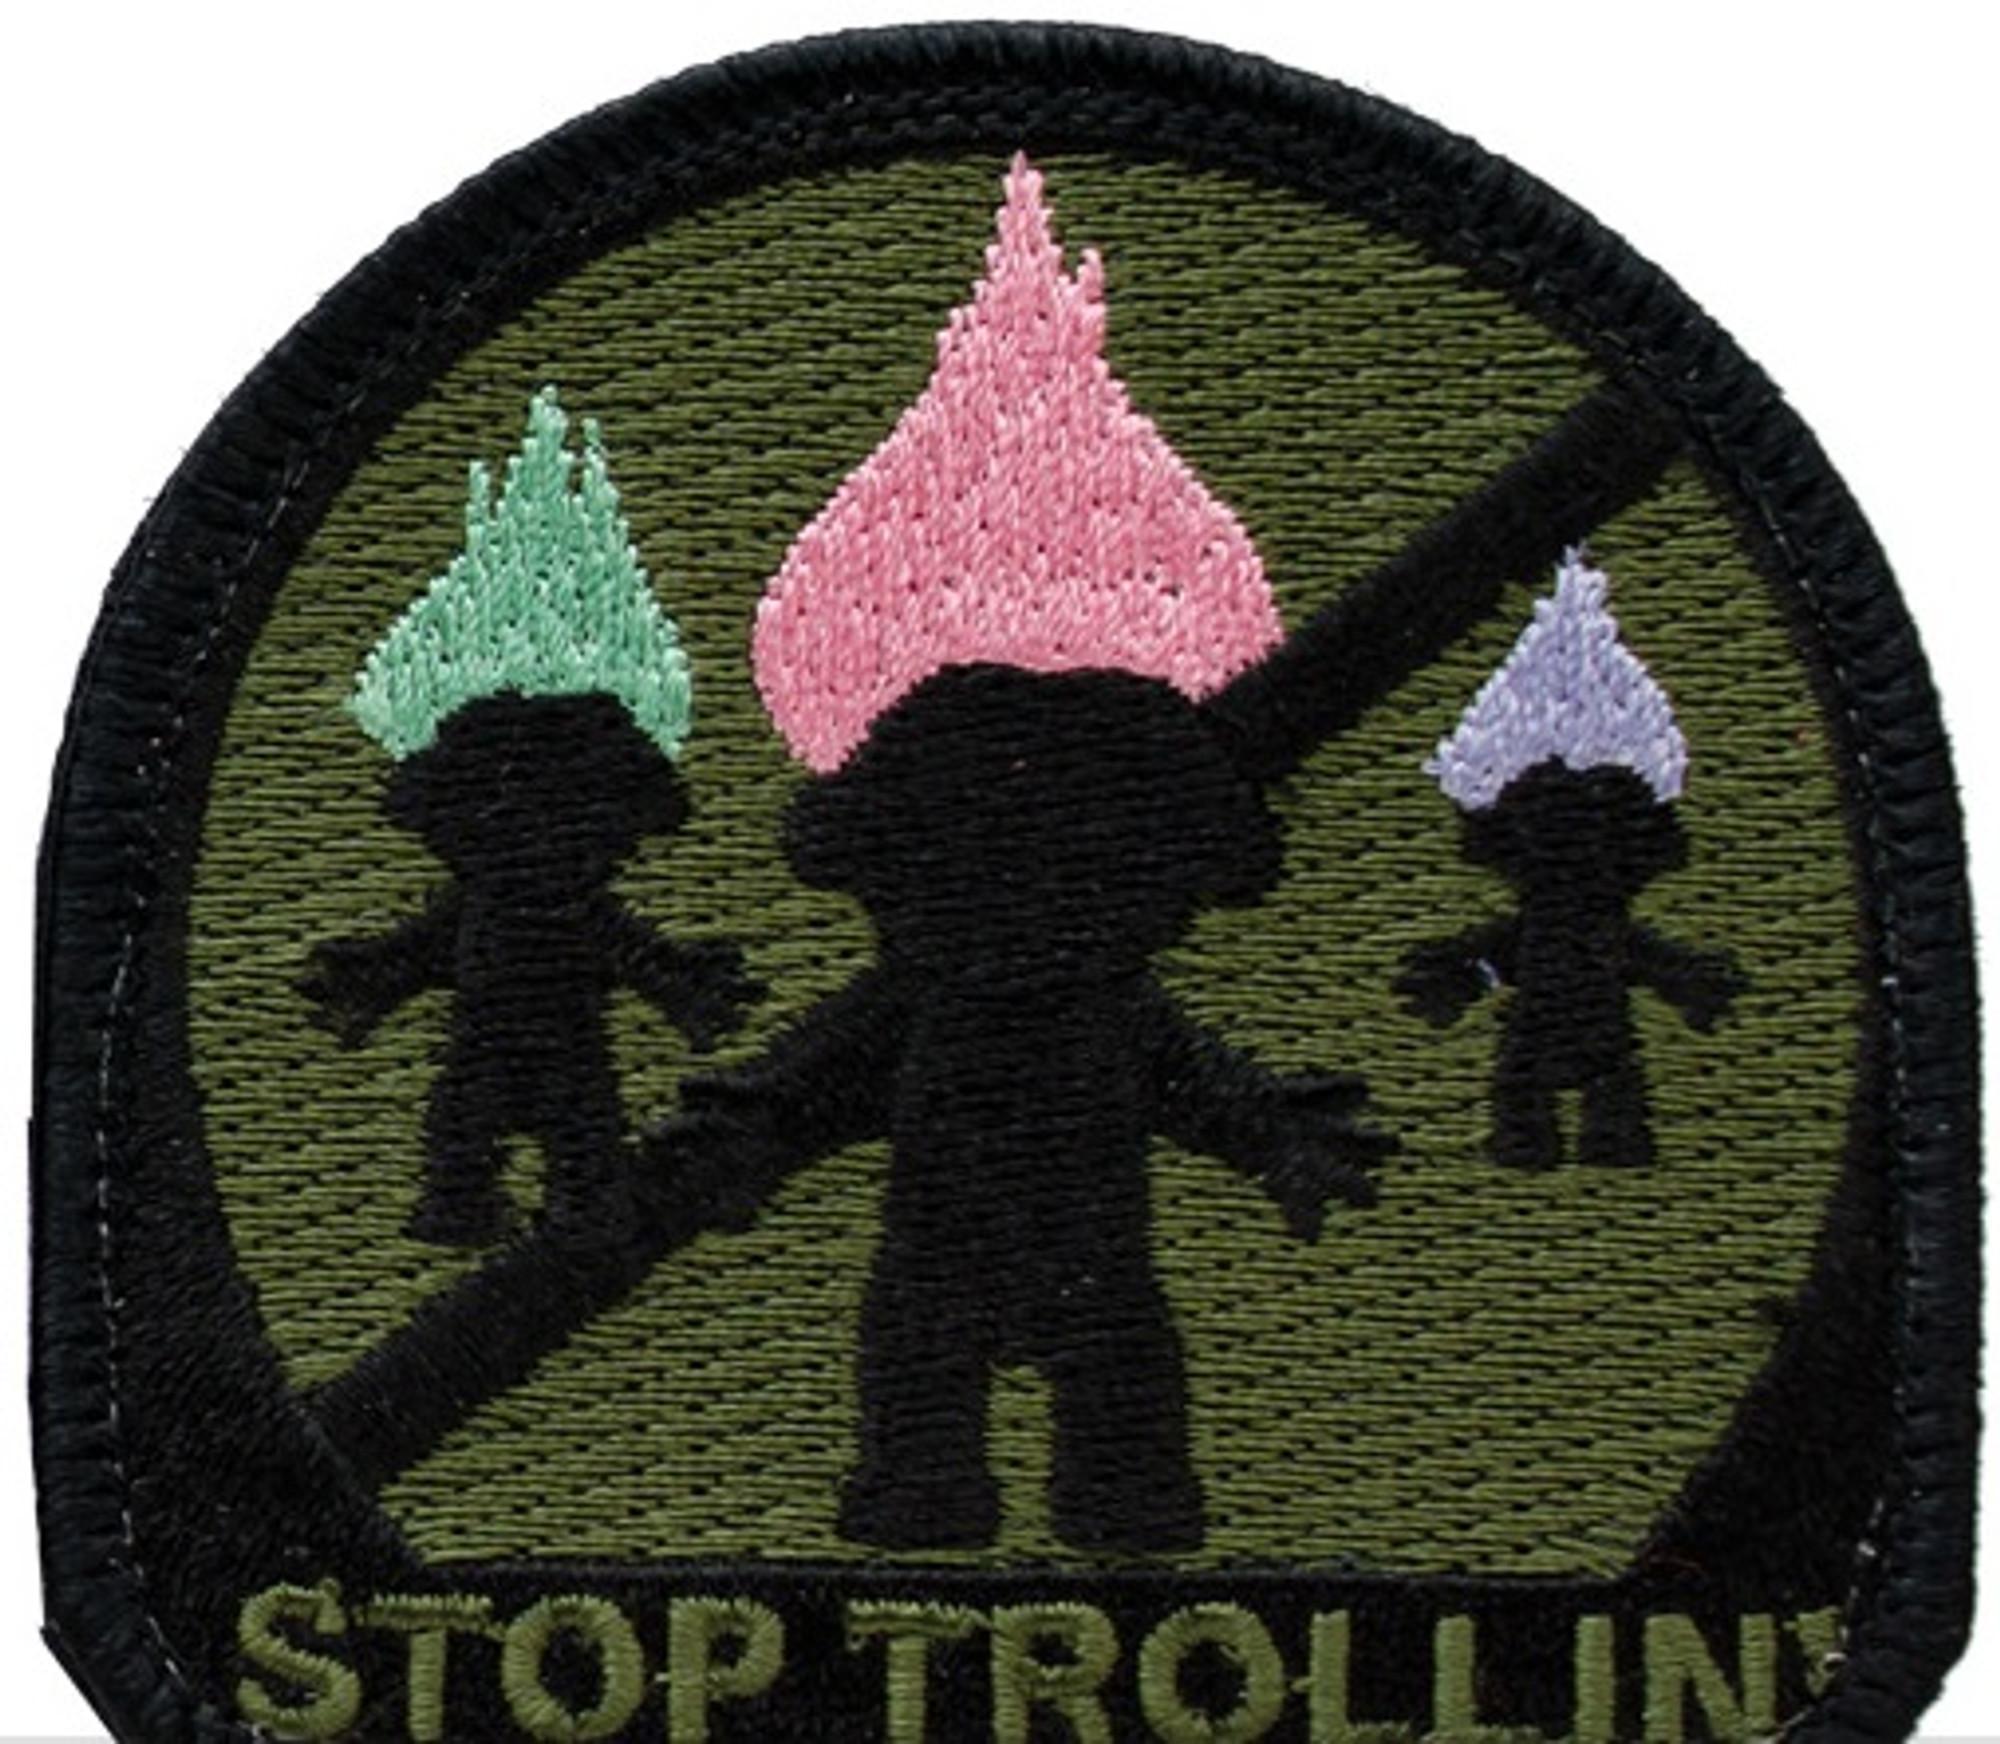 Stop Trollin' - Morale Patch - Olive Drab